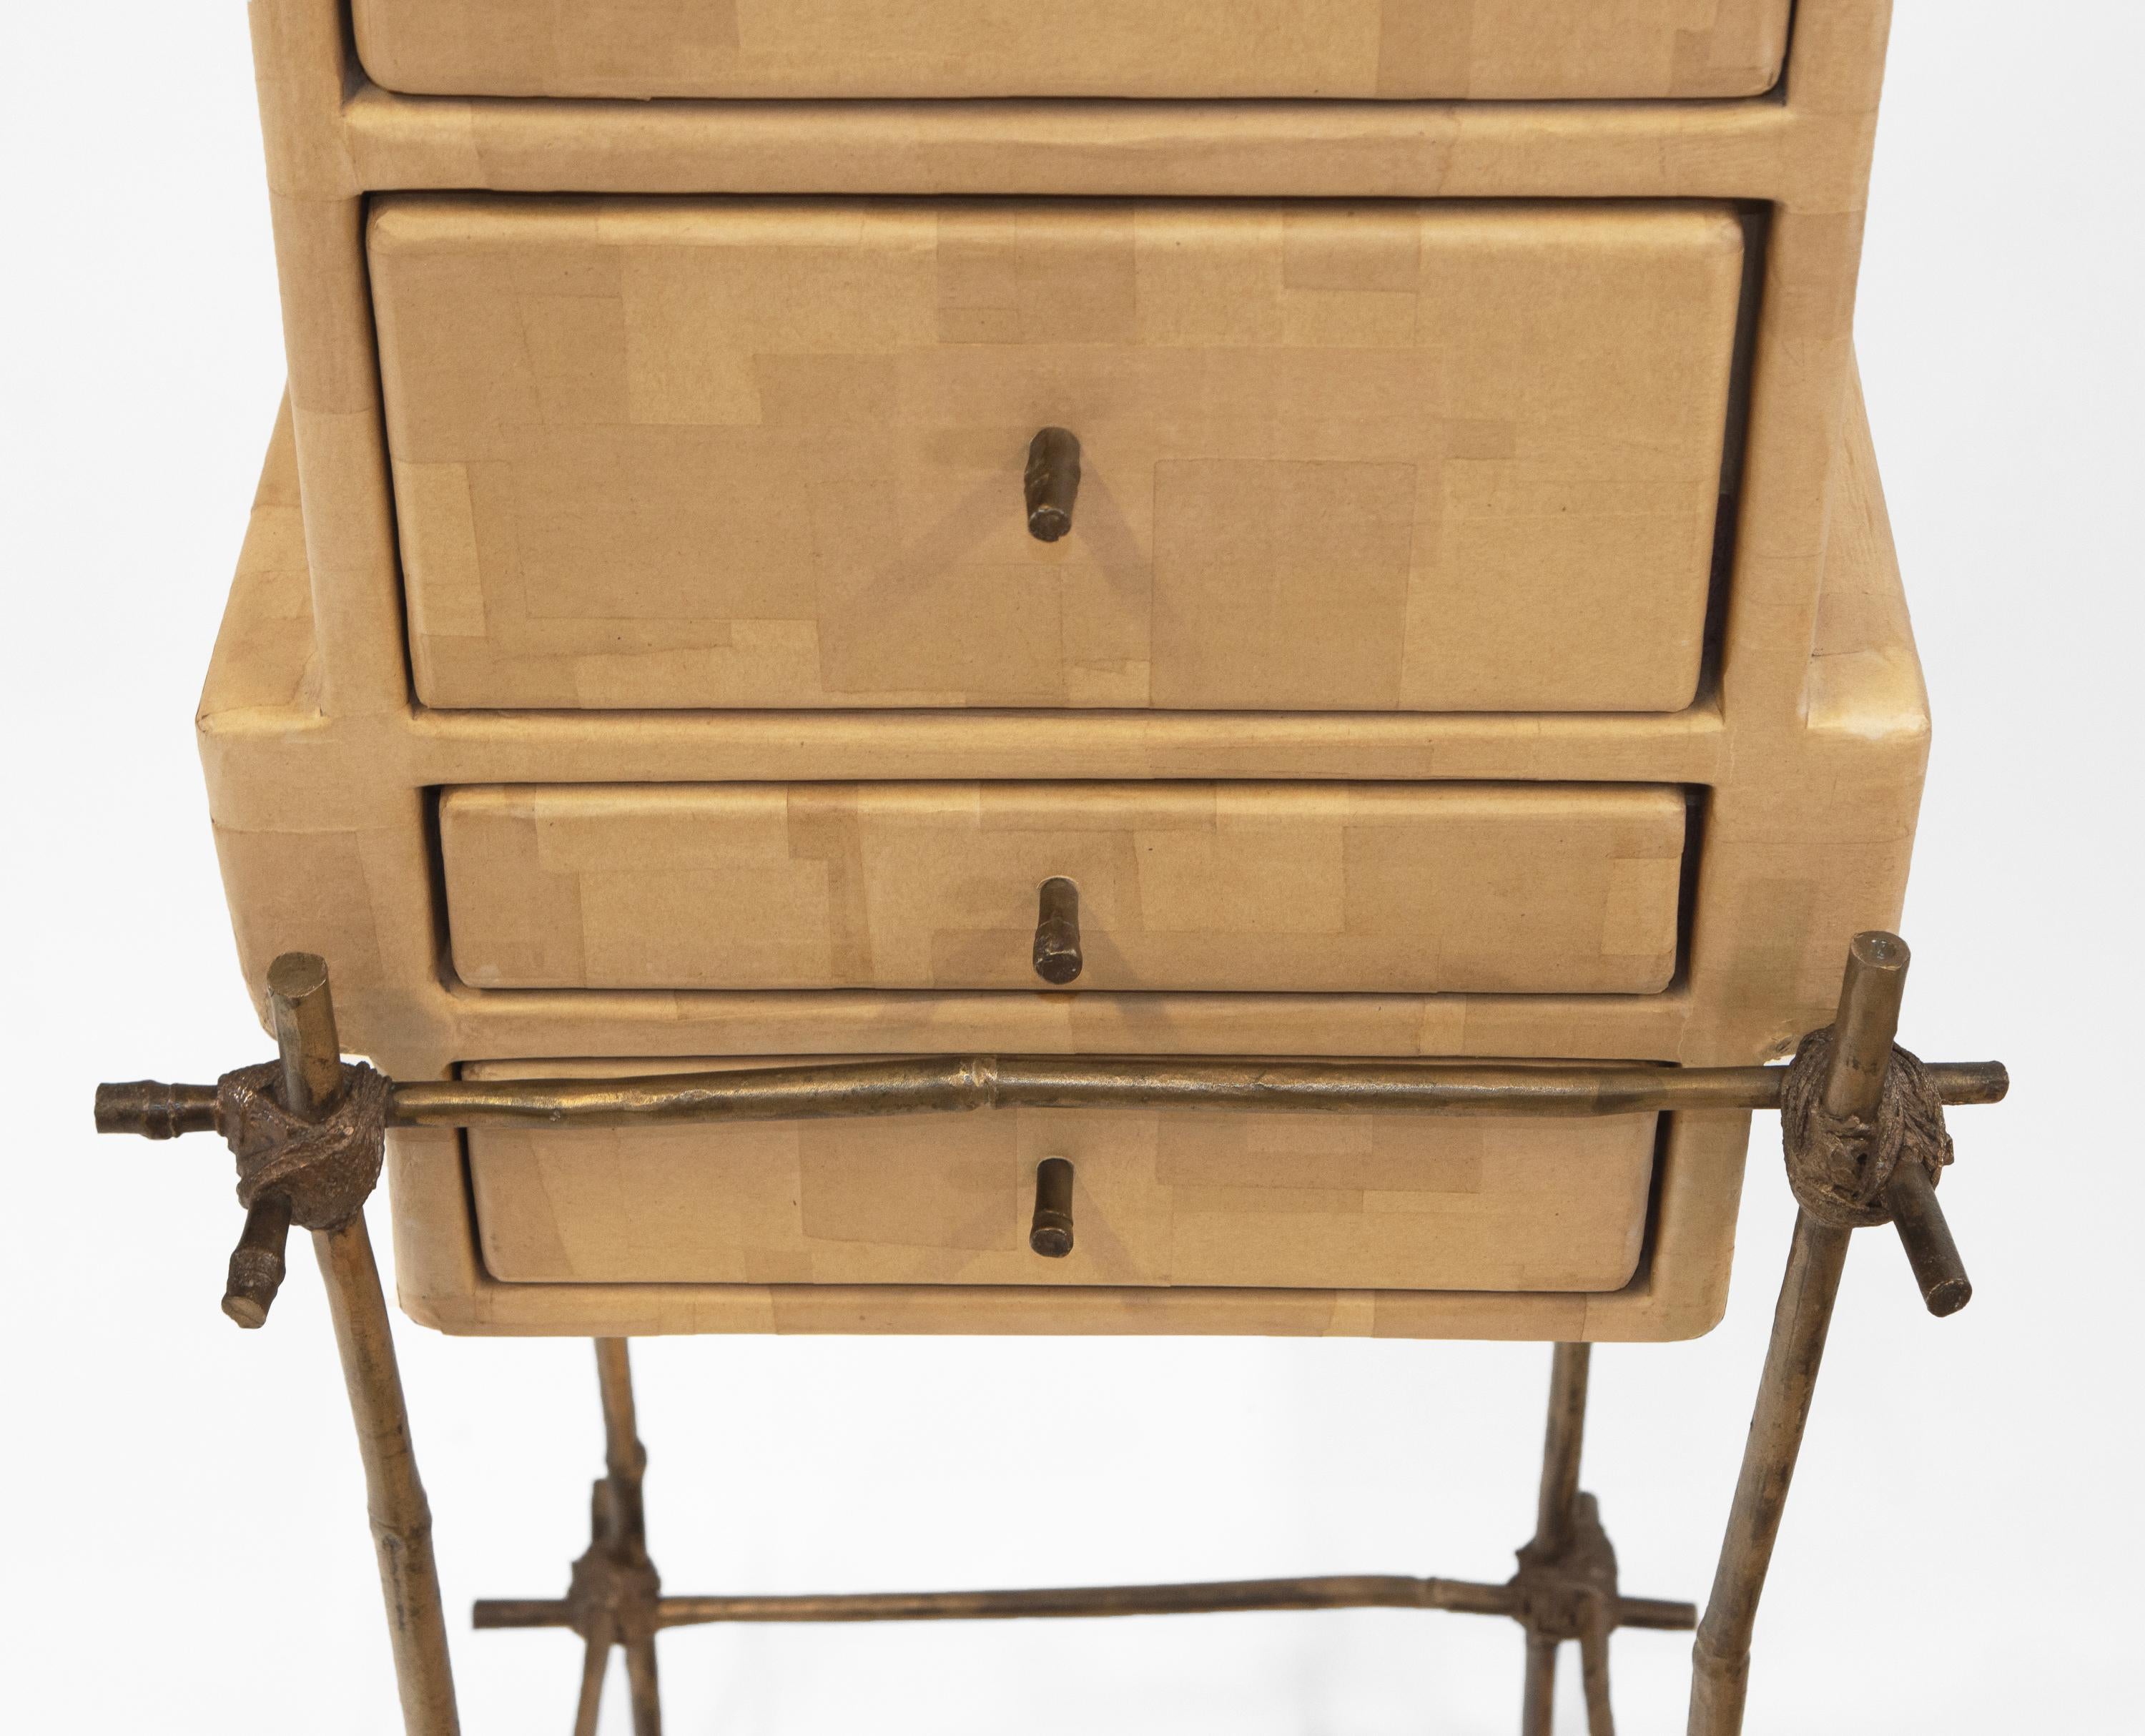 Modern Studio Glithero Ad Hoc Cabinet On Gilt Bronze Bamboo Stand Les French Series 1 For Sale